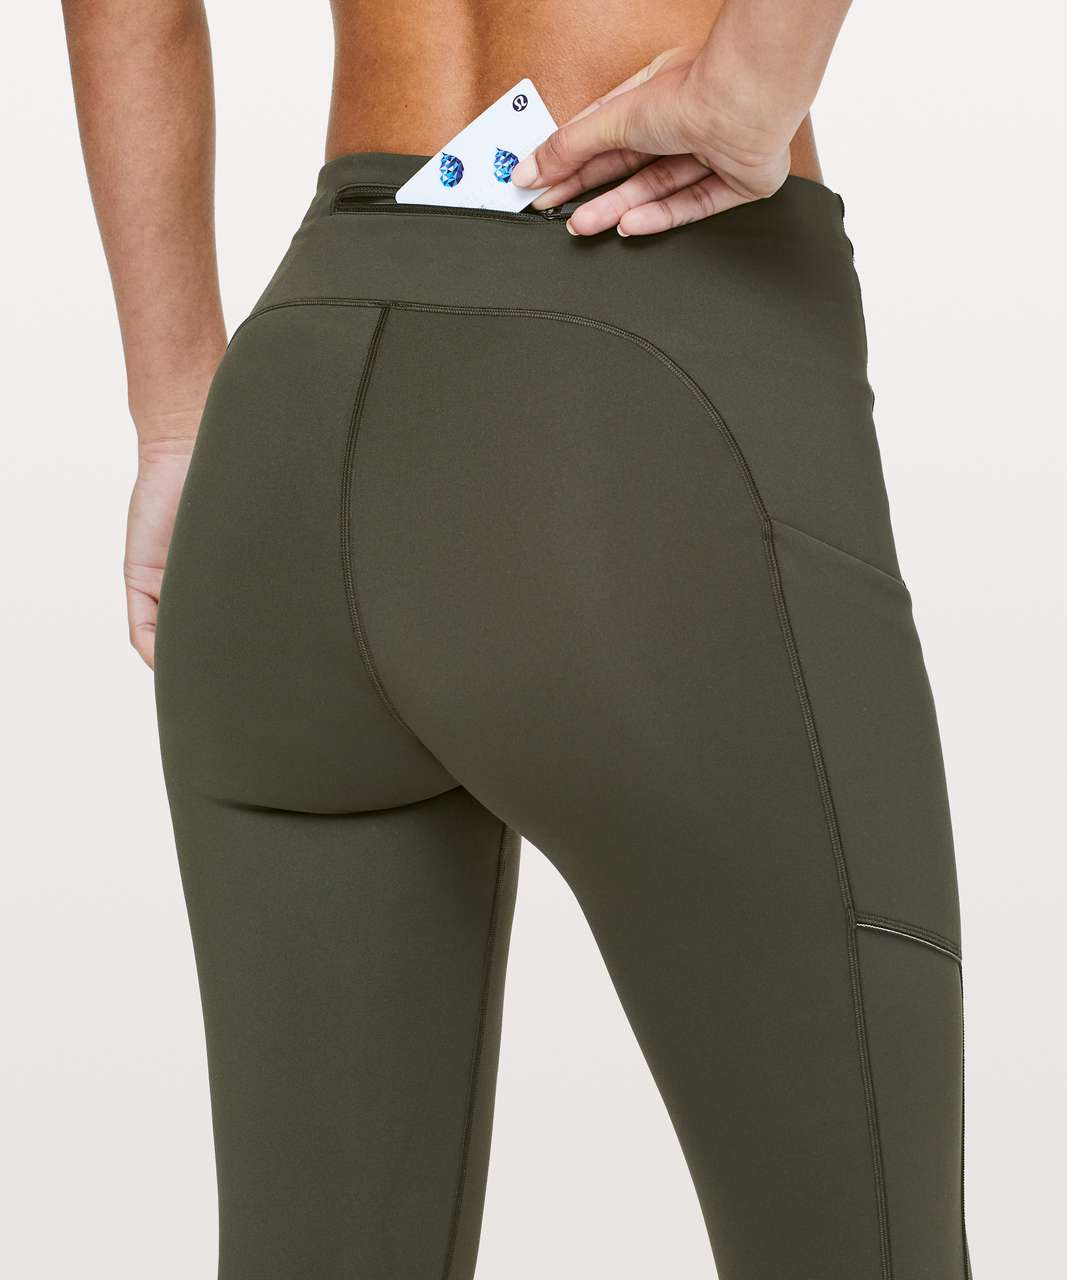 Lululemon Speed Up Tight *Full-On Luxtreme 28" - Dark Olive (Second Release)